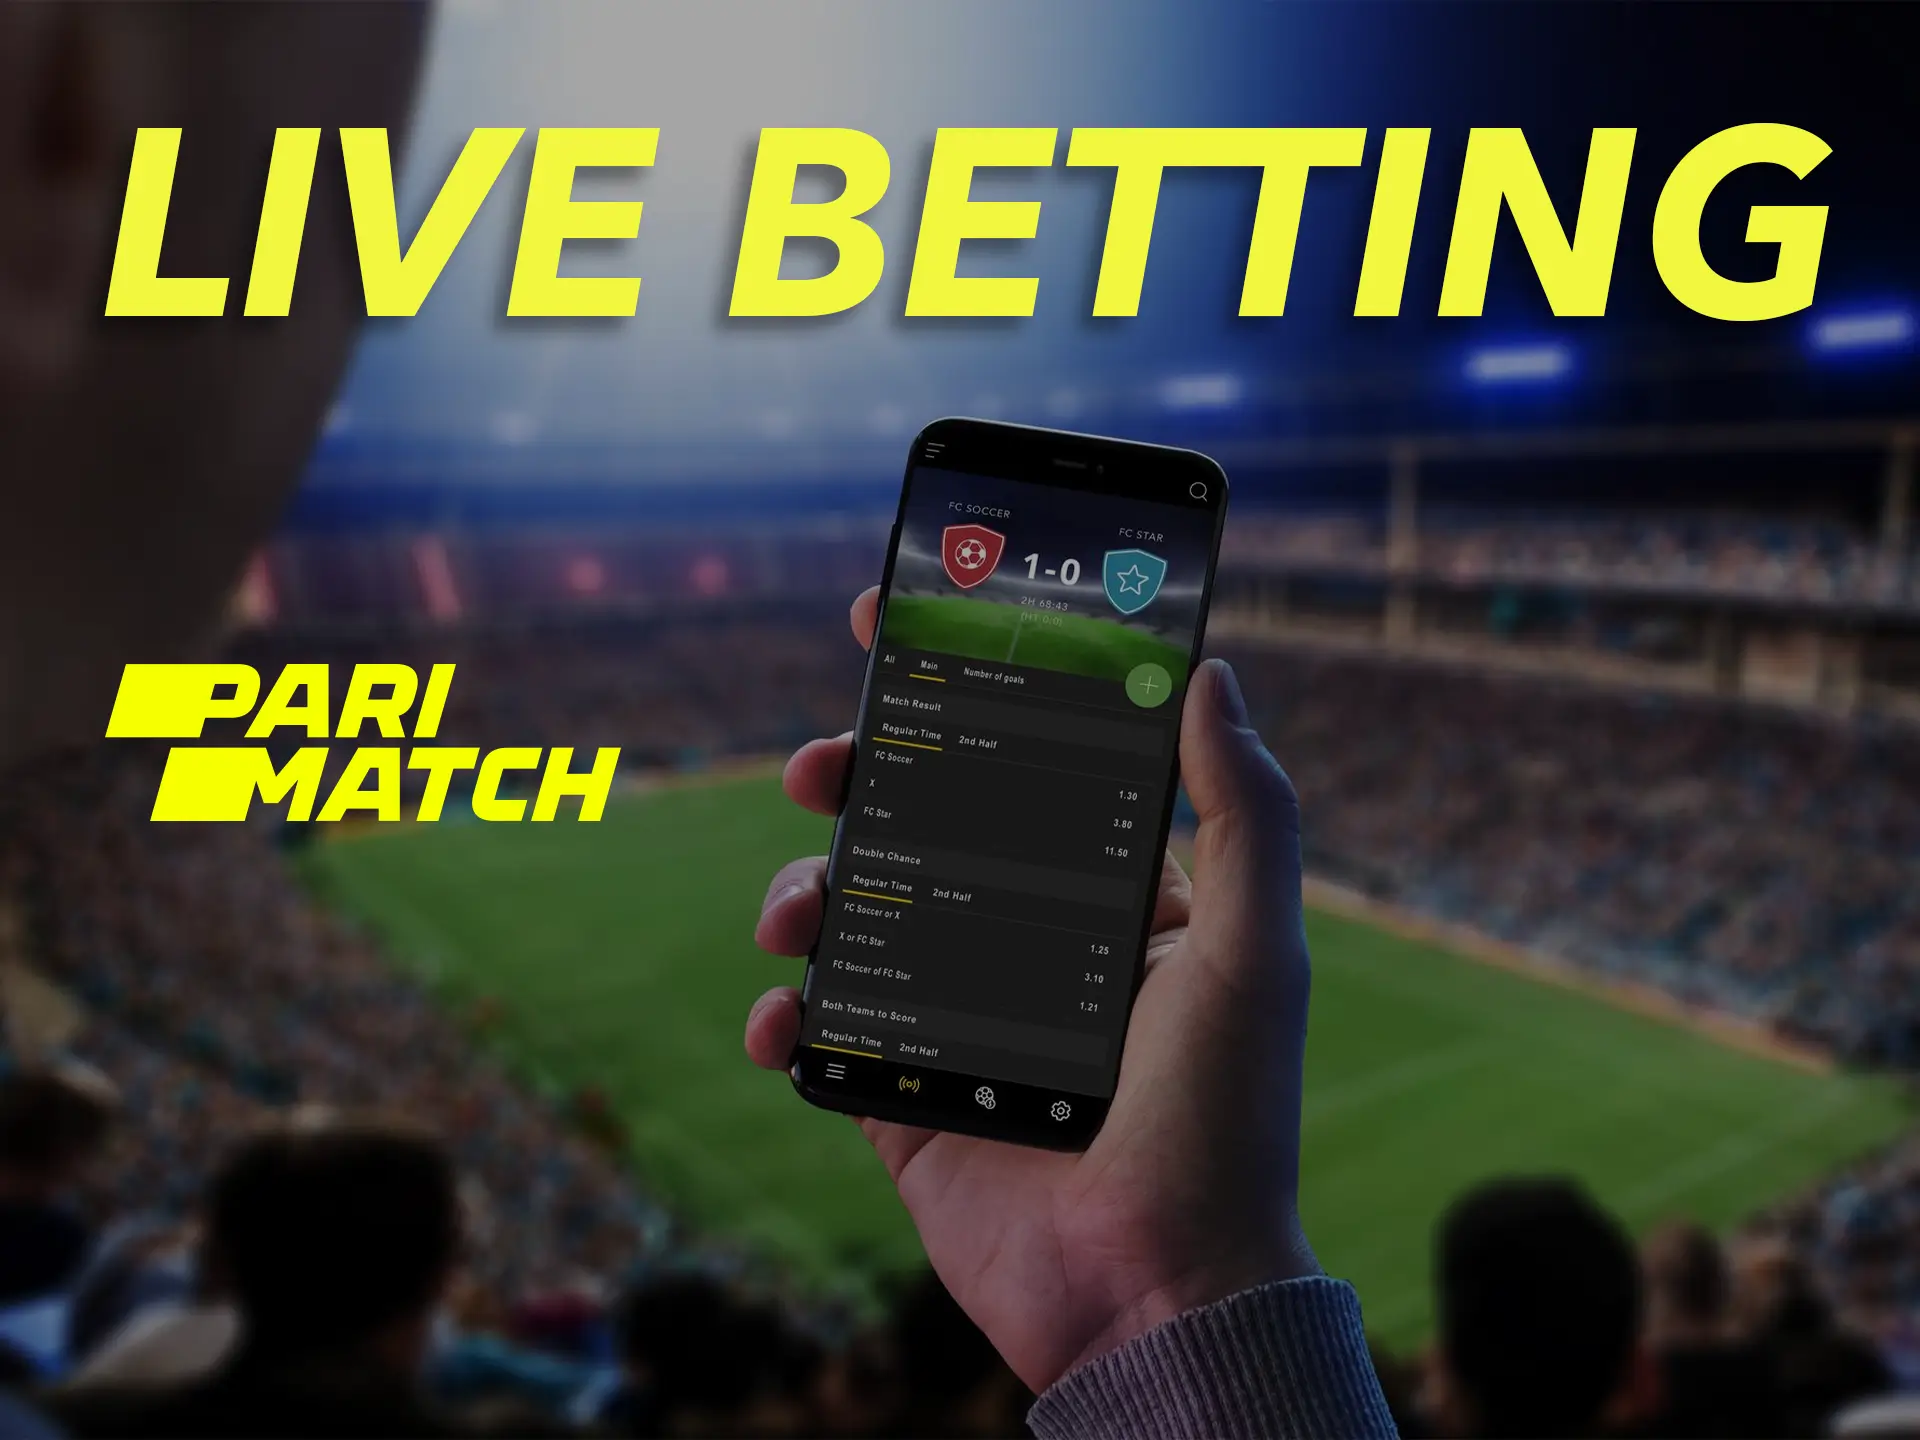 Live betting at Parimatch gives players great opportunities for big wins.